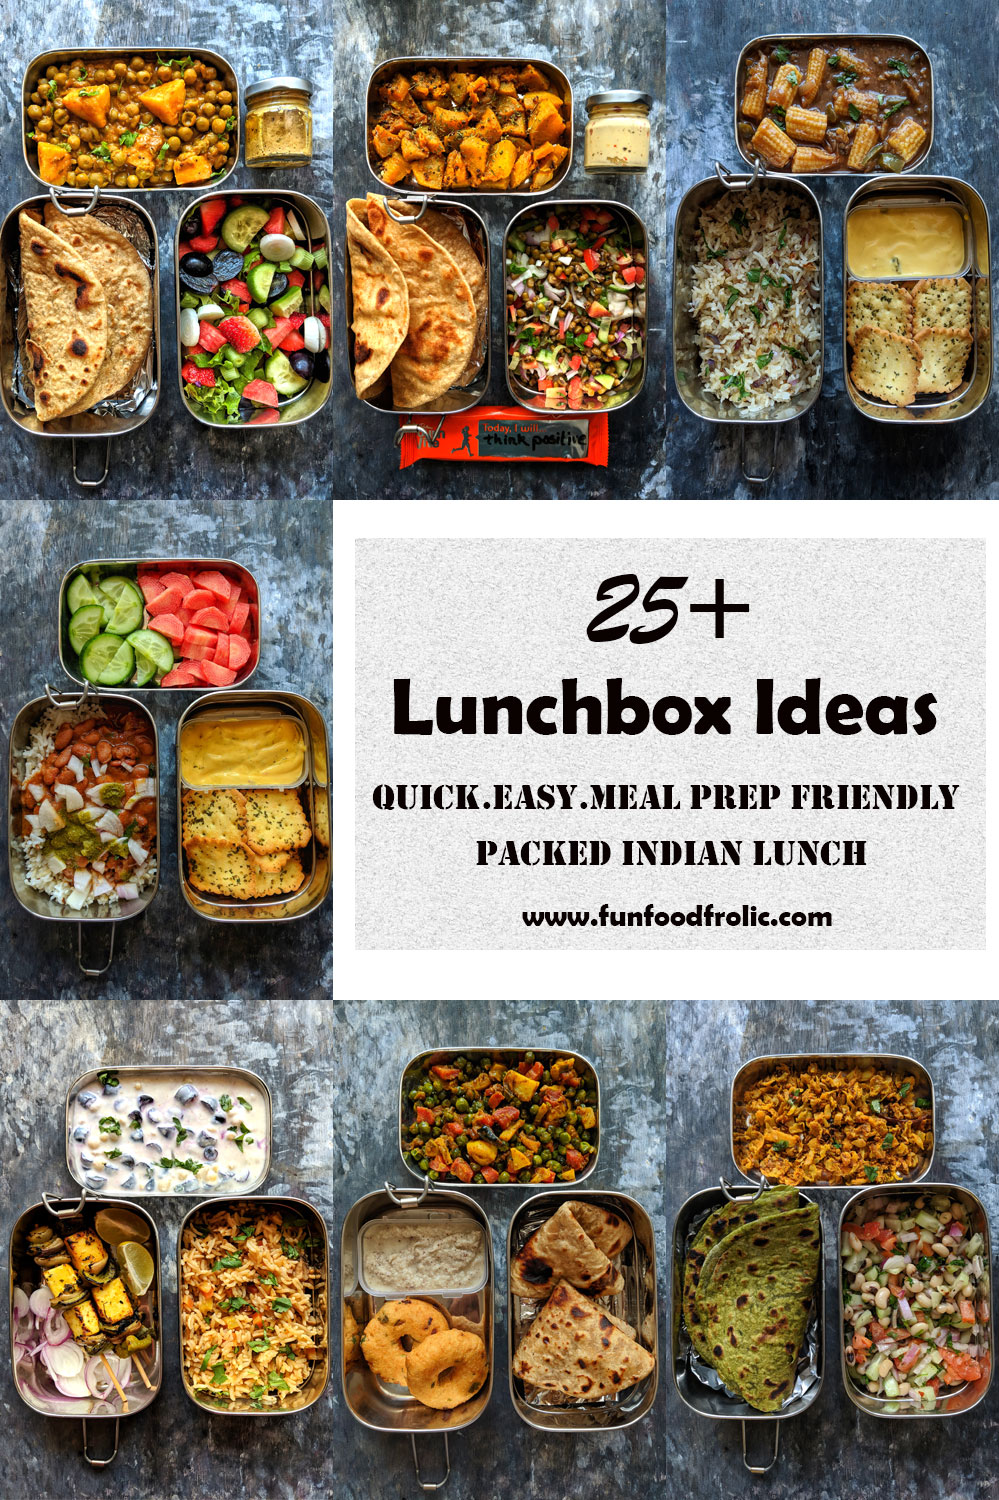 The 18 best adult lunch boxes to bring to work in 2022